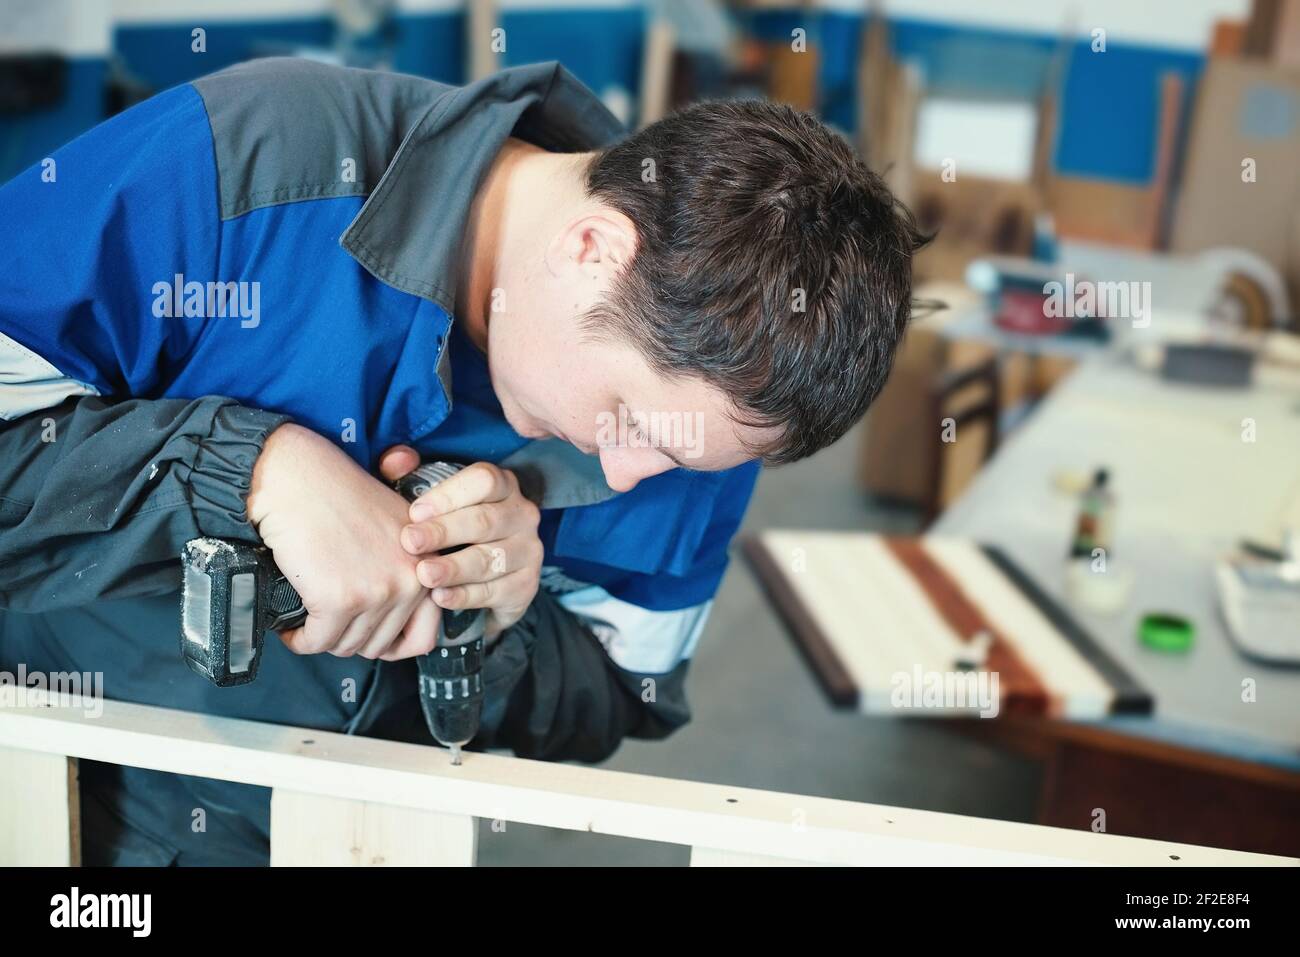 A young worker in overalls with a screwdriver collects furniture in a carpenter's shop. Background for making furniture. Stock Photo